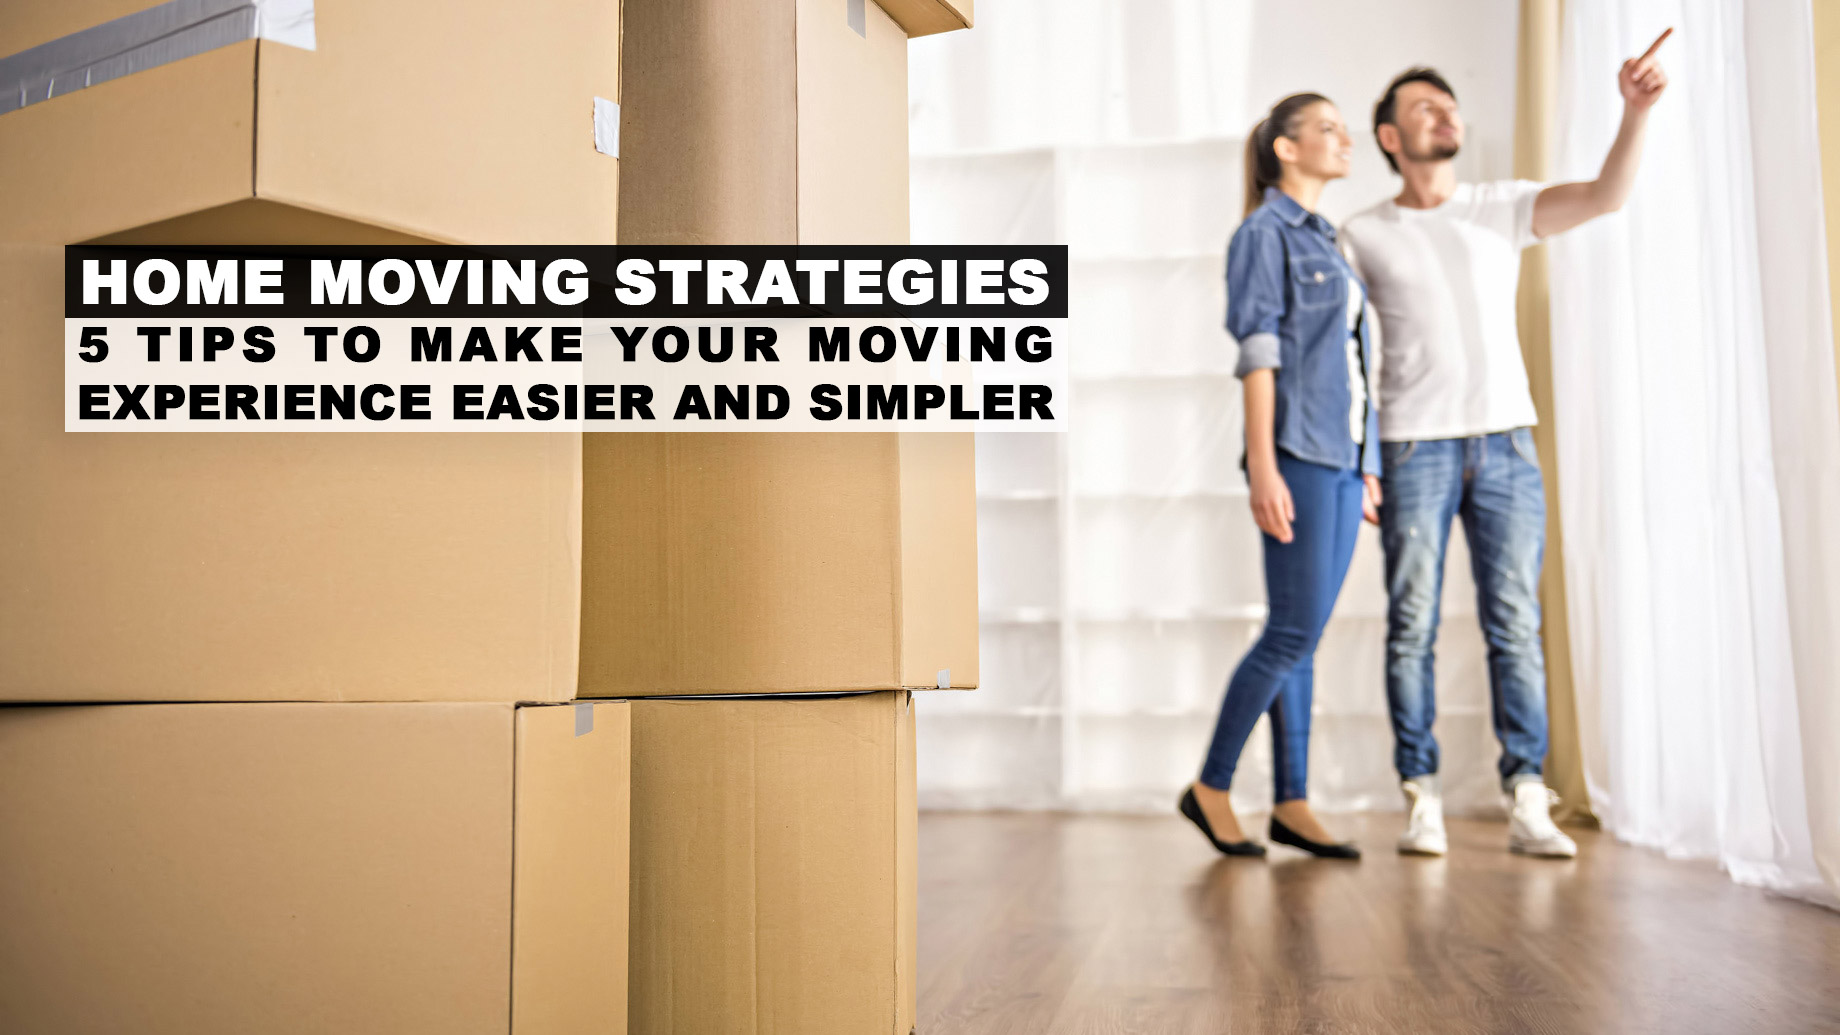 Home Moving Strategies - 5 Tips To Make Your Moving Experience Easier And Simpler